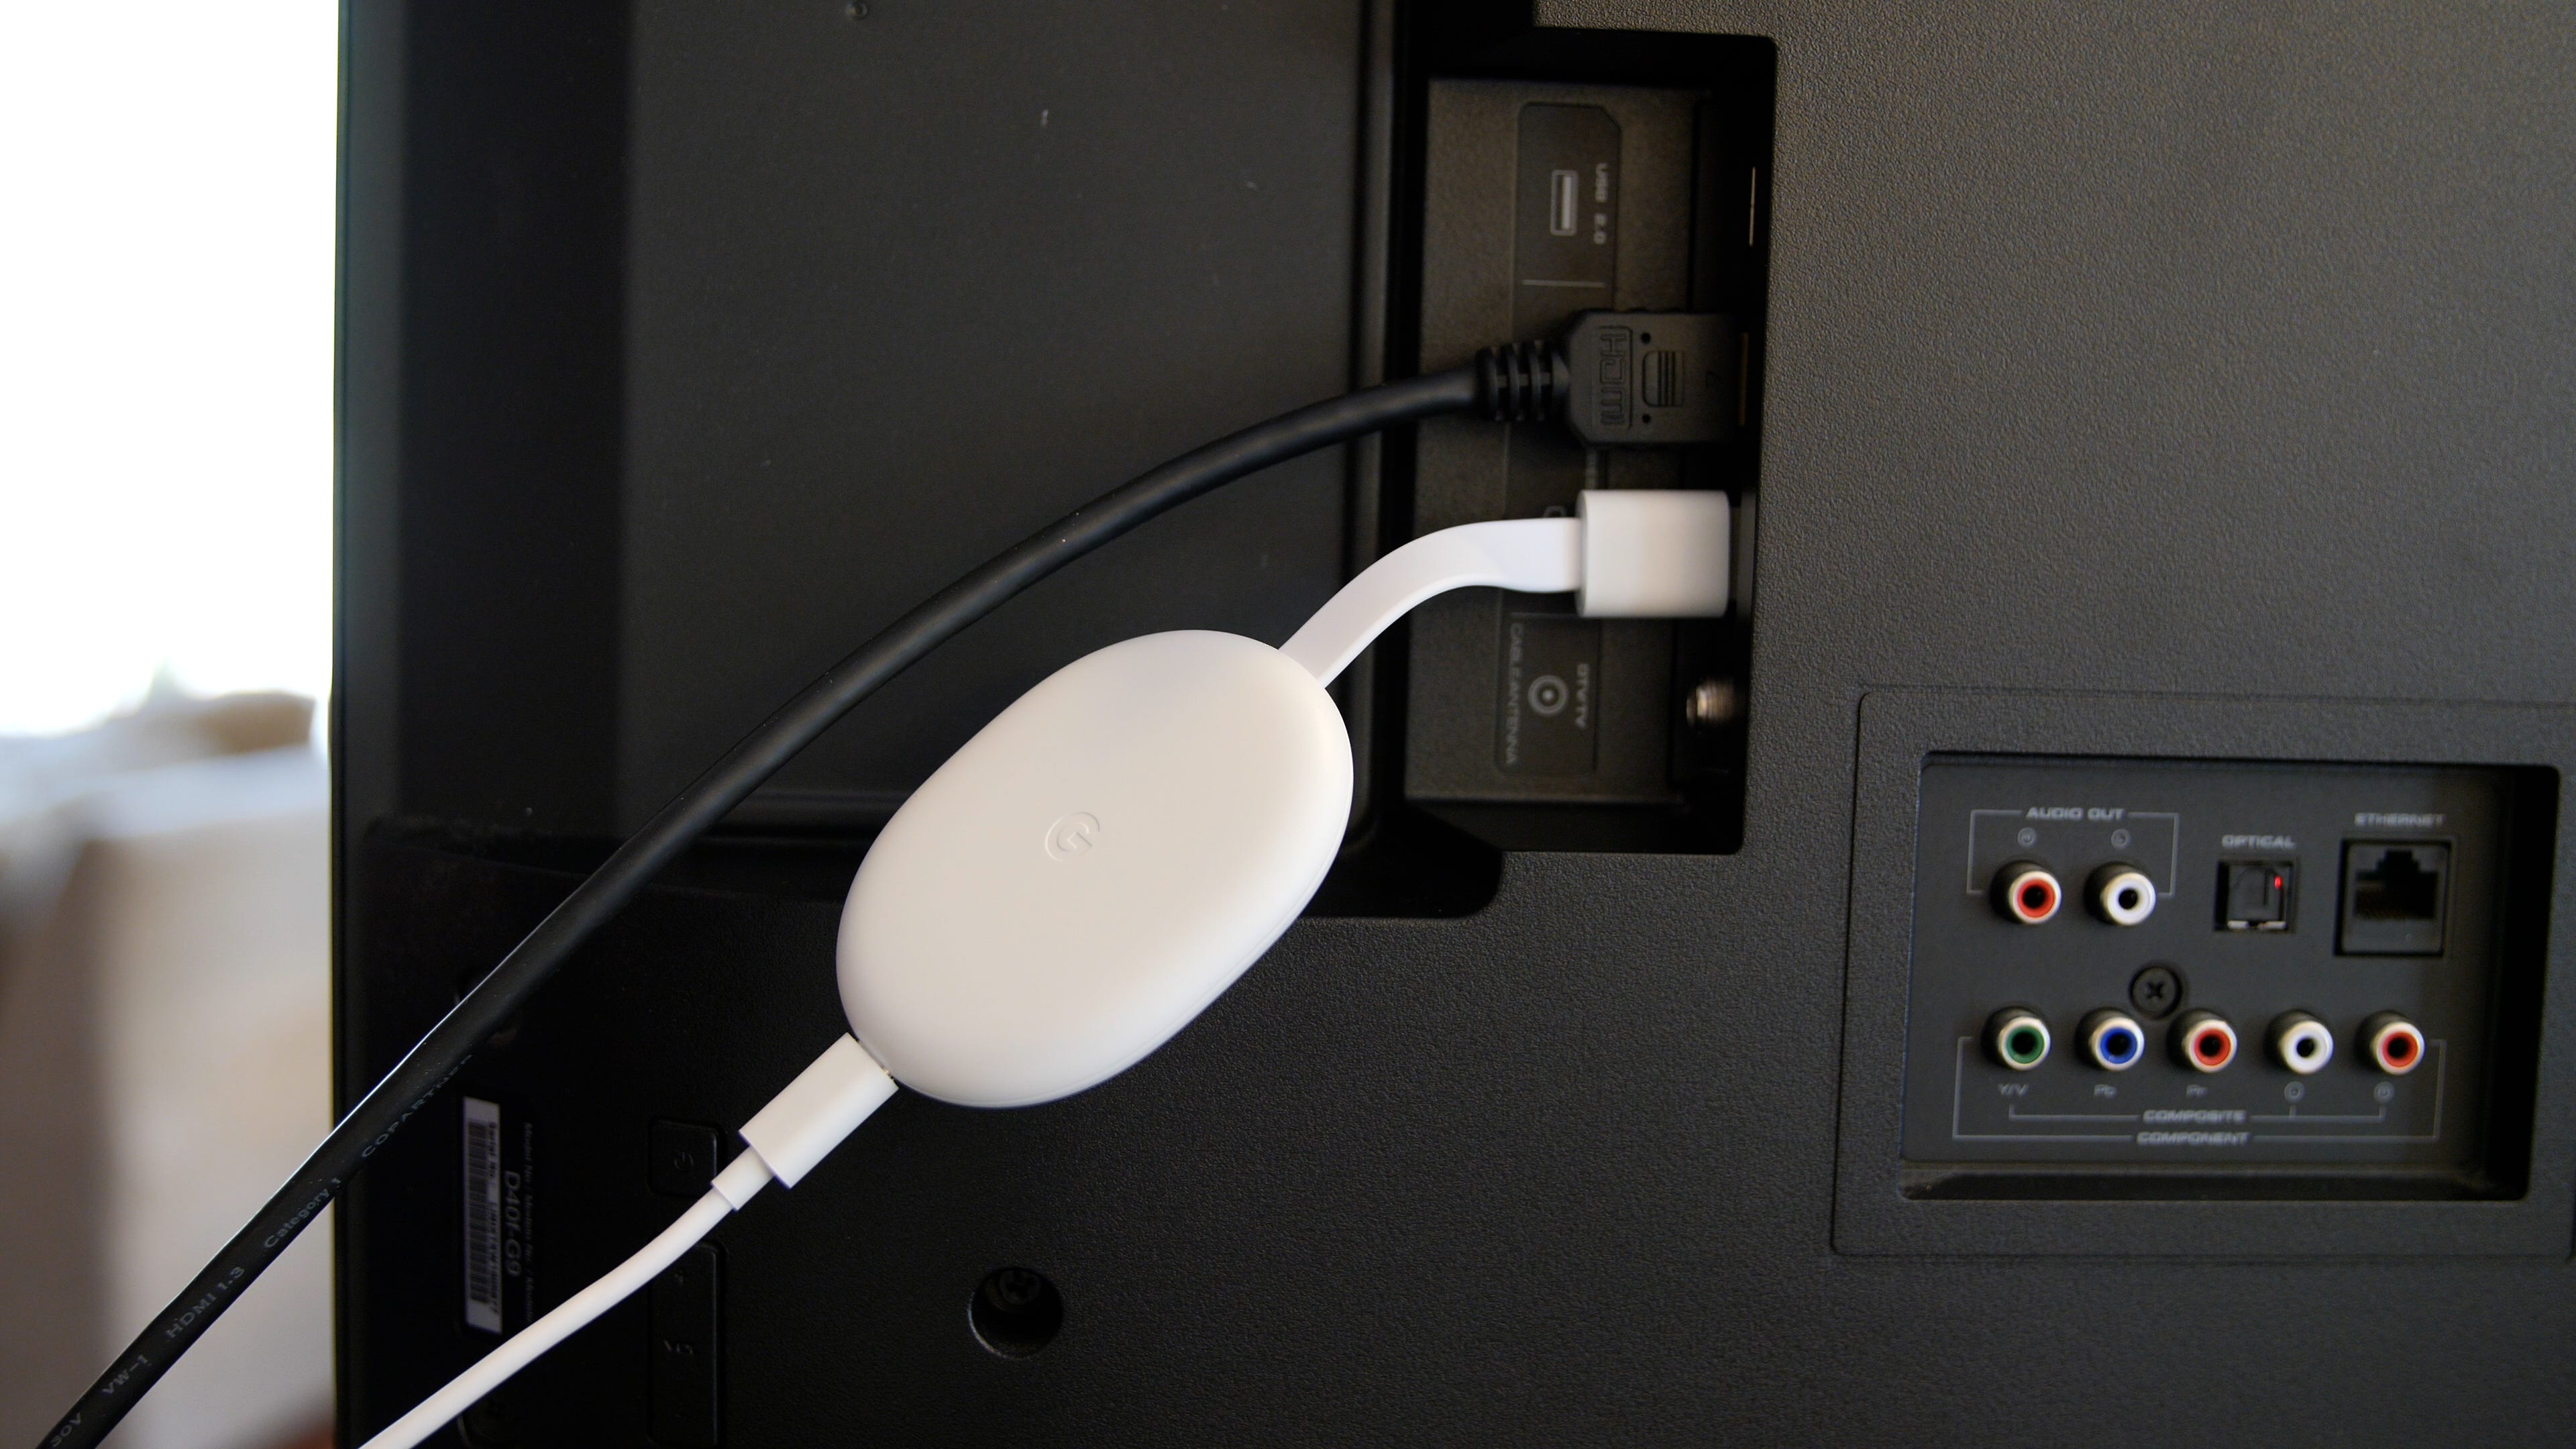 Set up your new smart plug in minutes. Here's your step-by-step guide - CNET